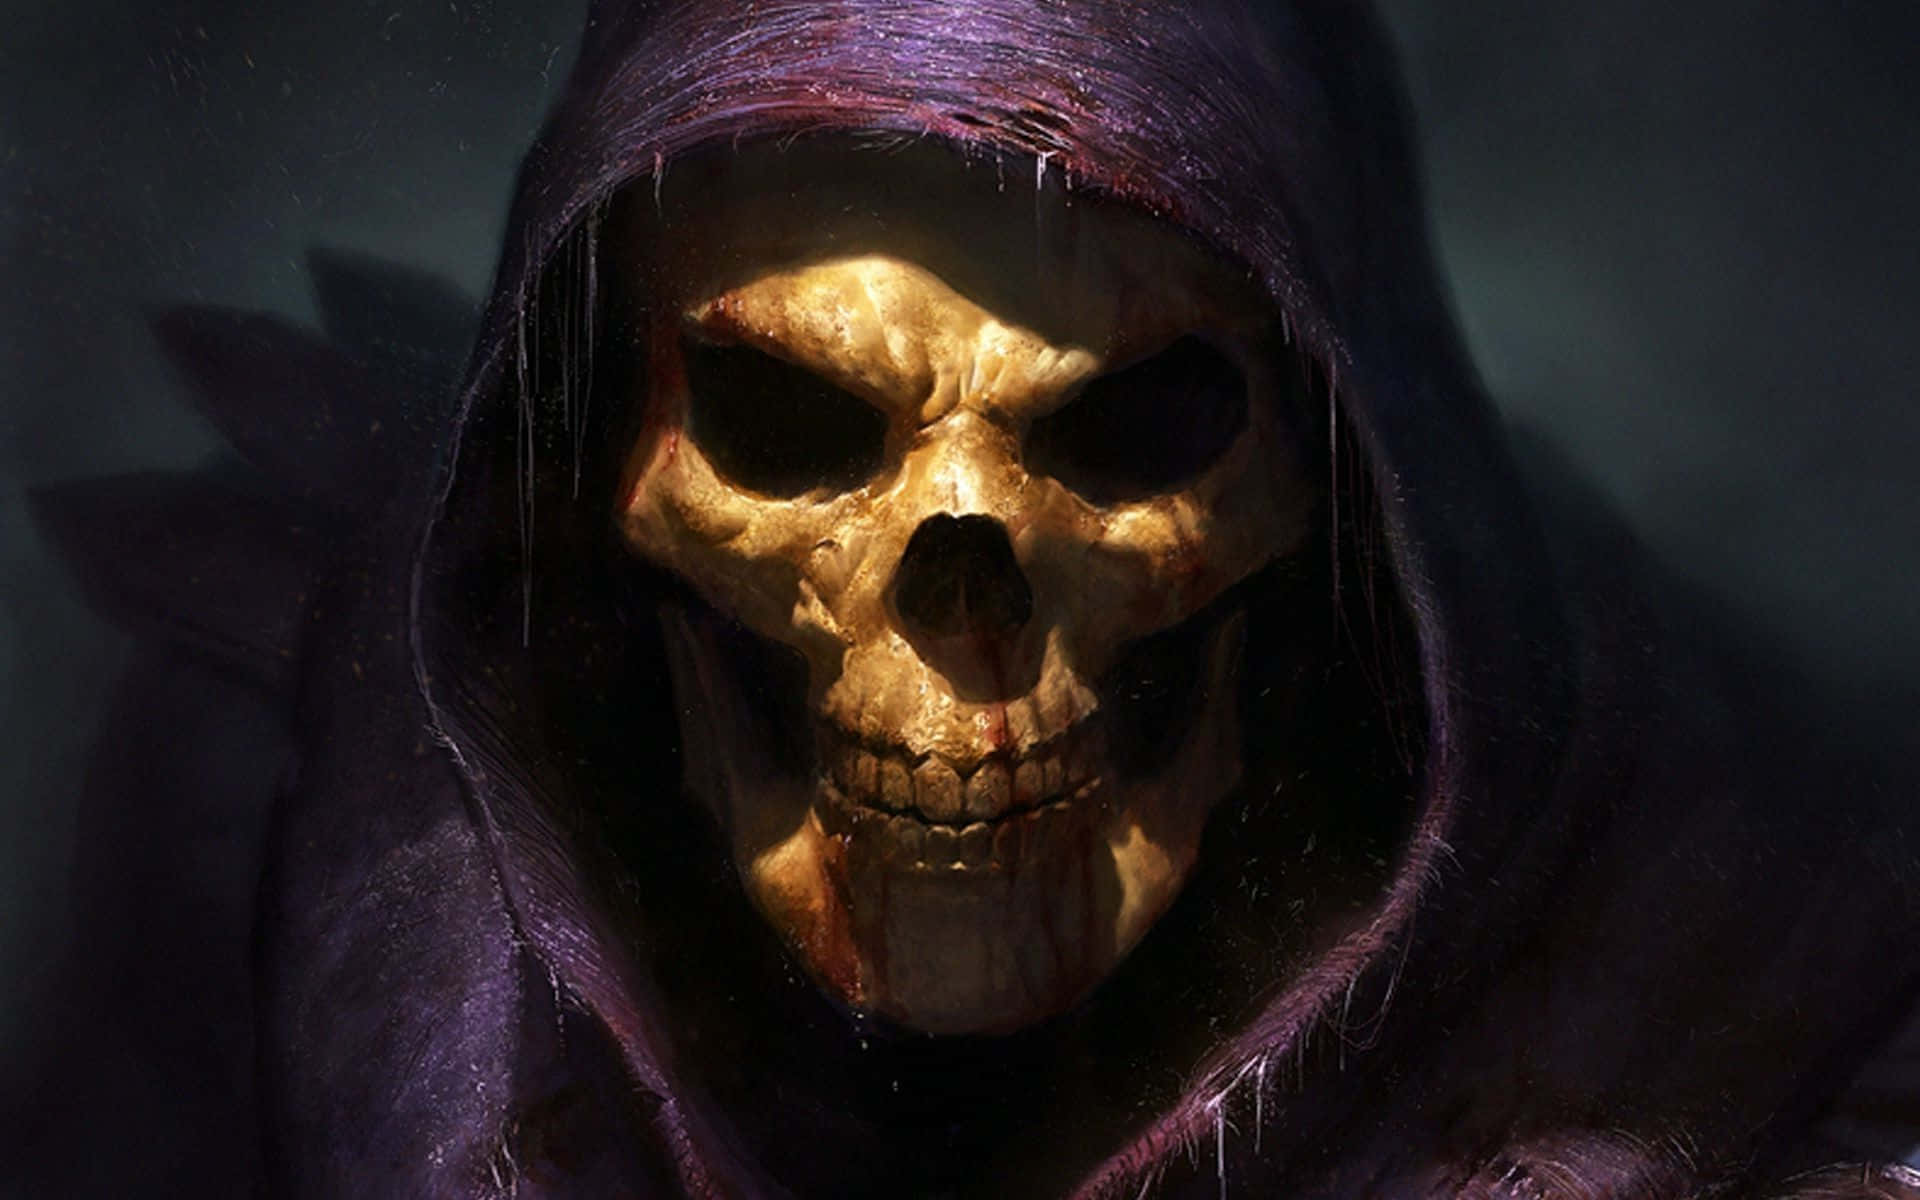 A Skull With A Purple Hood And A Knife